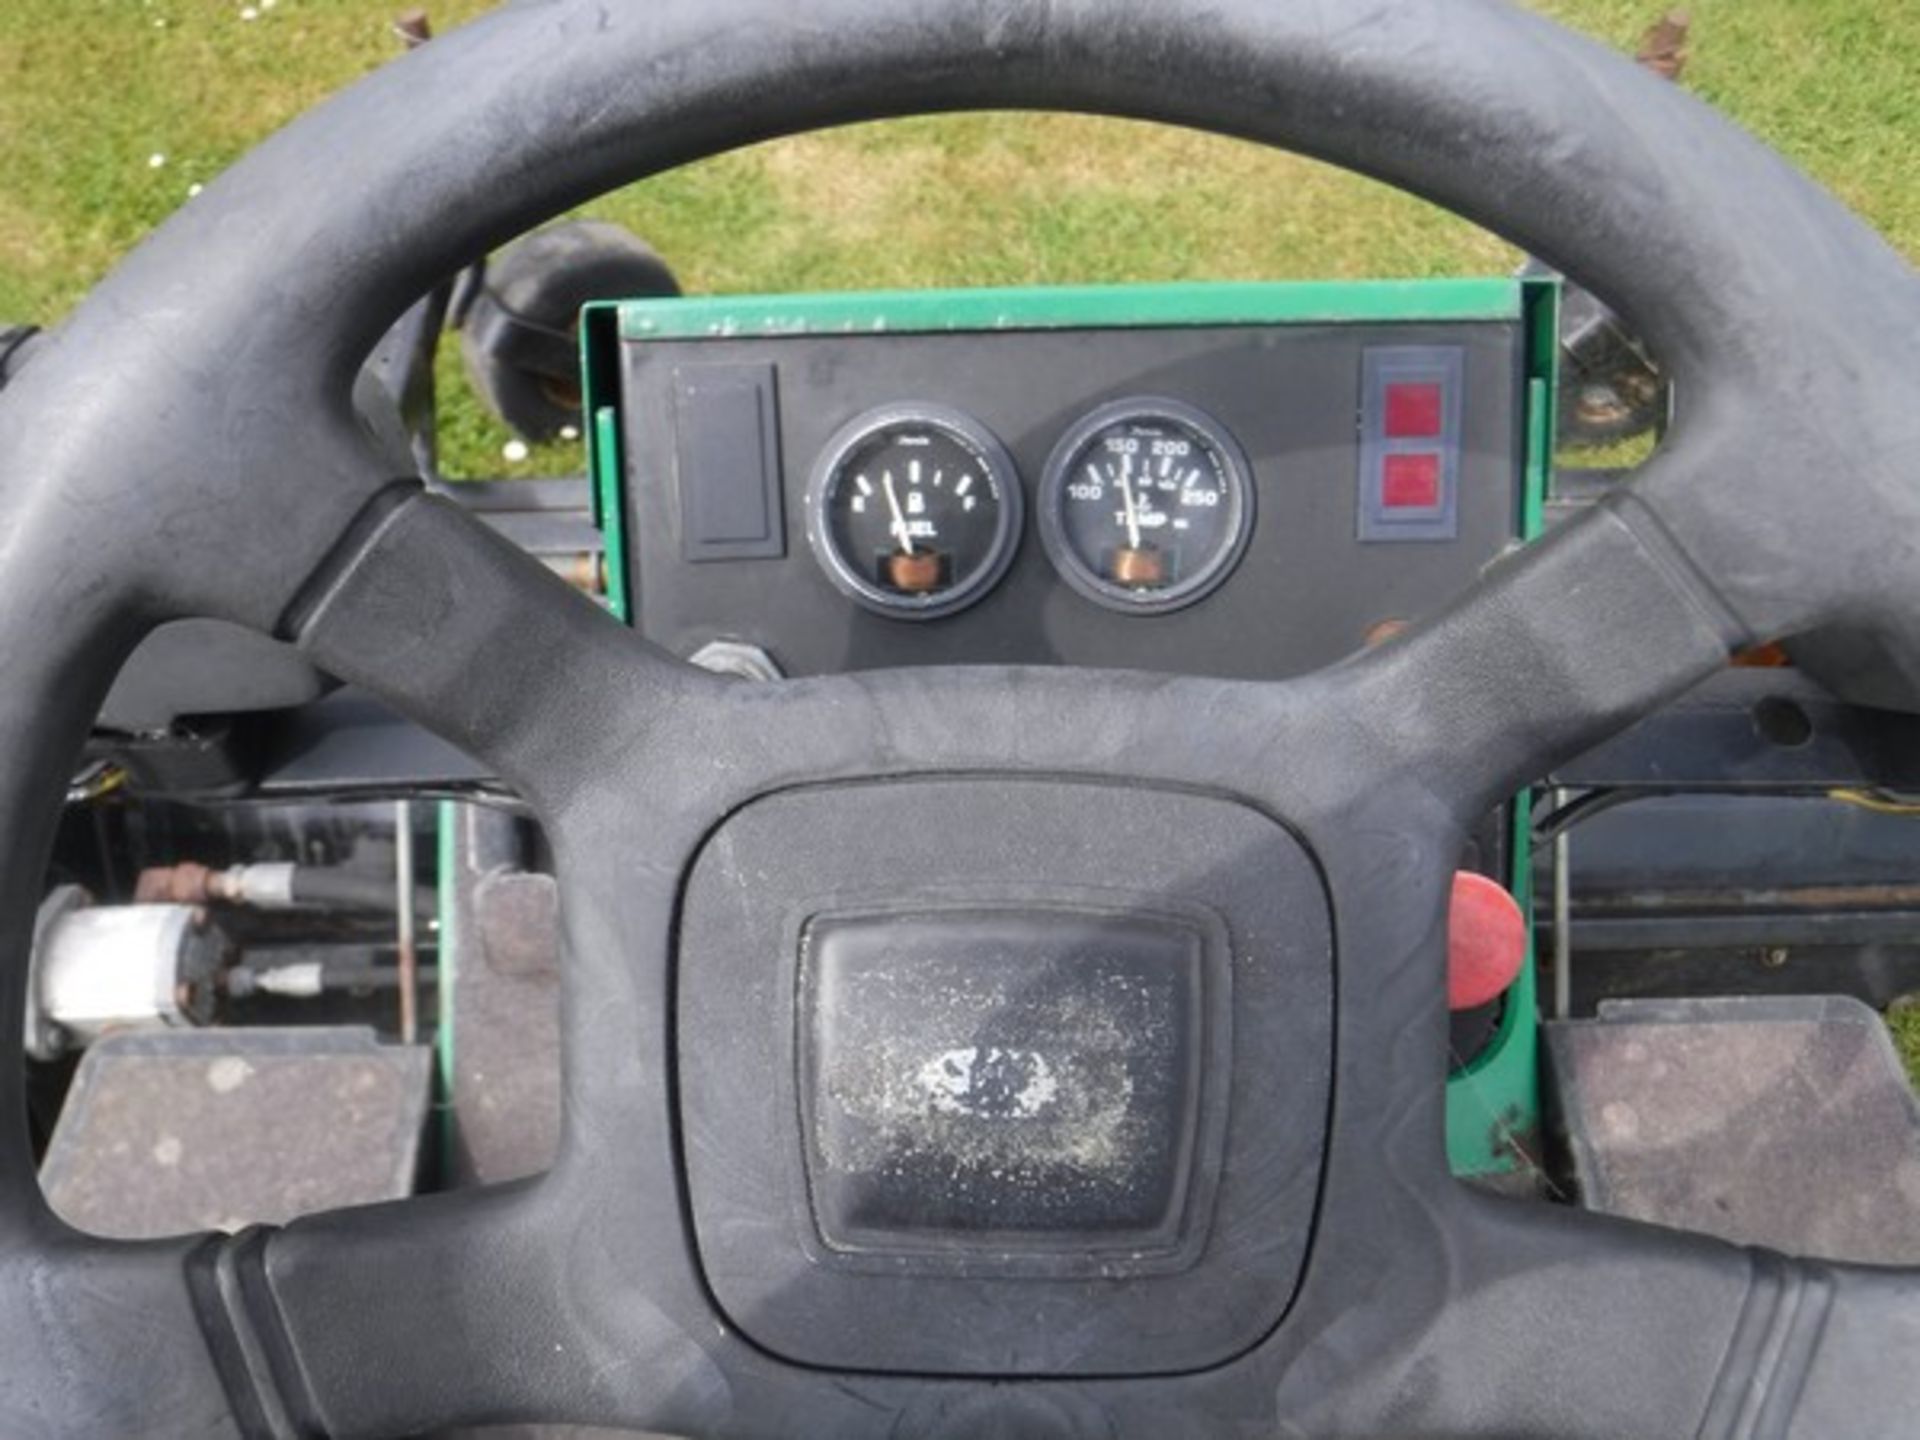 RANSOMES FRONT LINE 7280 ride on mower. Reg - Y106BSX. 4029hrs (not verified) - Image 3 of 13